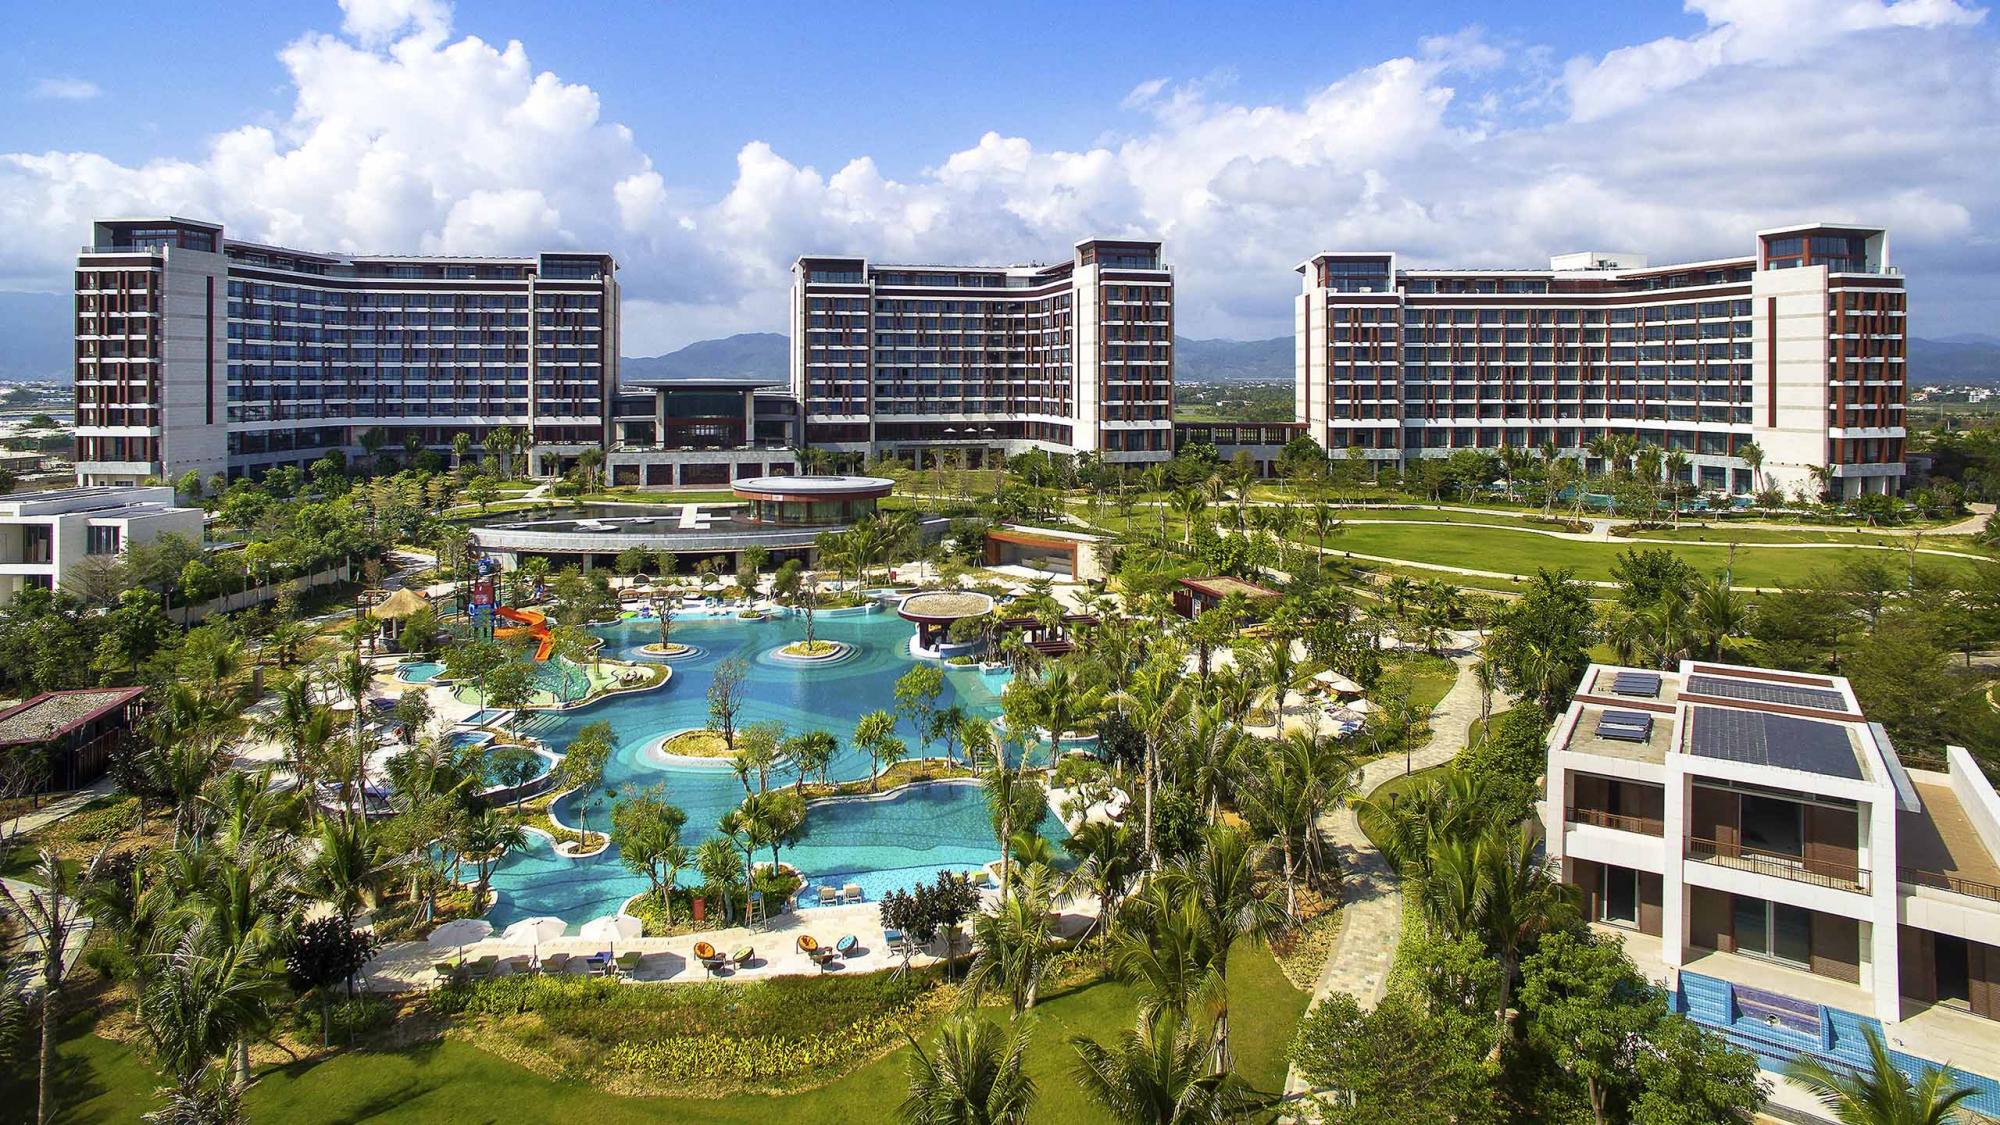 The Sofitel Sanya Leeman Resort's lovely hotel situated in staggering China.